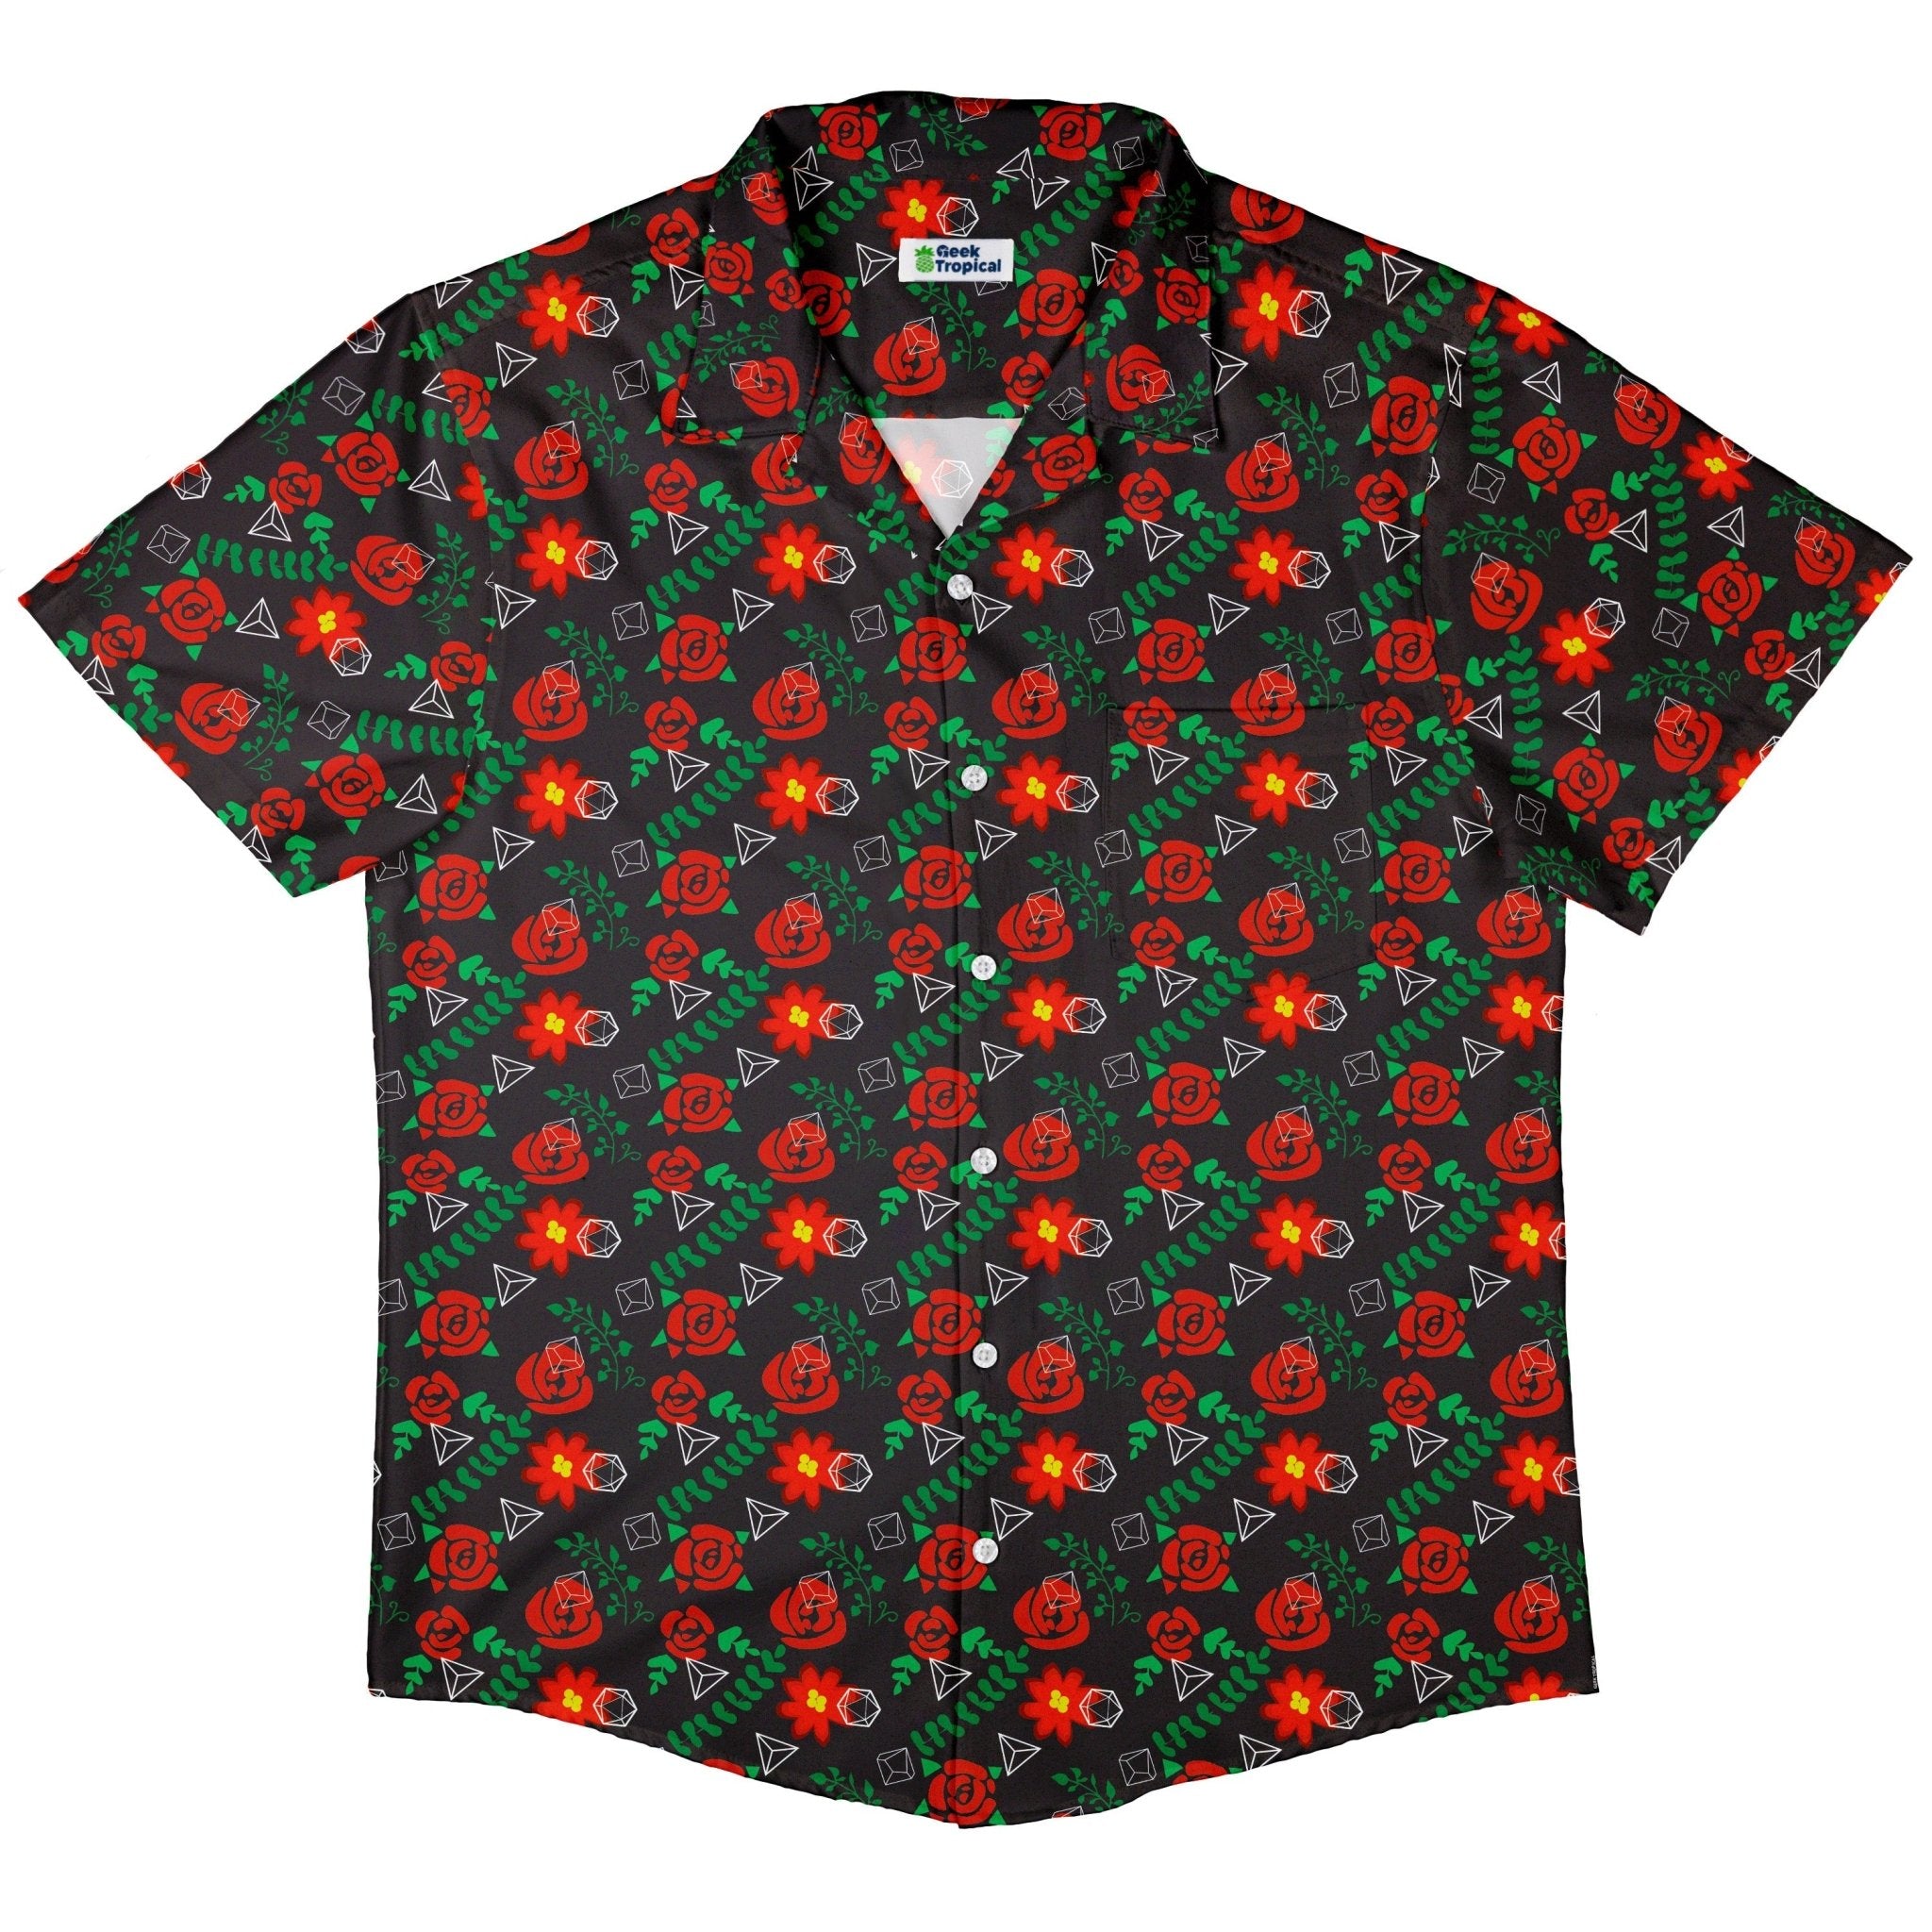 Dice and Roses Button Up Shirt - adult sizing - Botany Print - Design by Heather Davenport